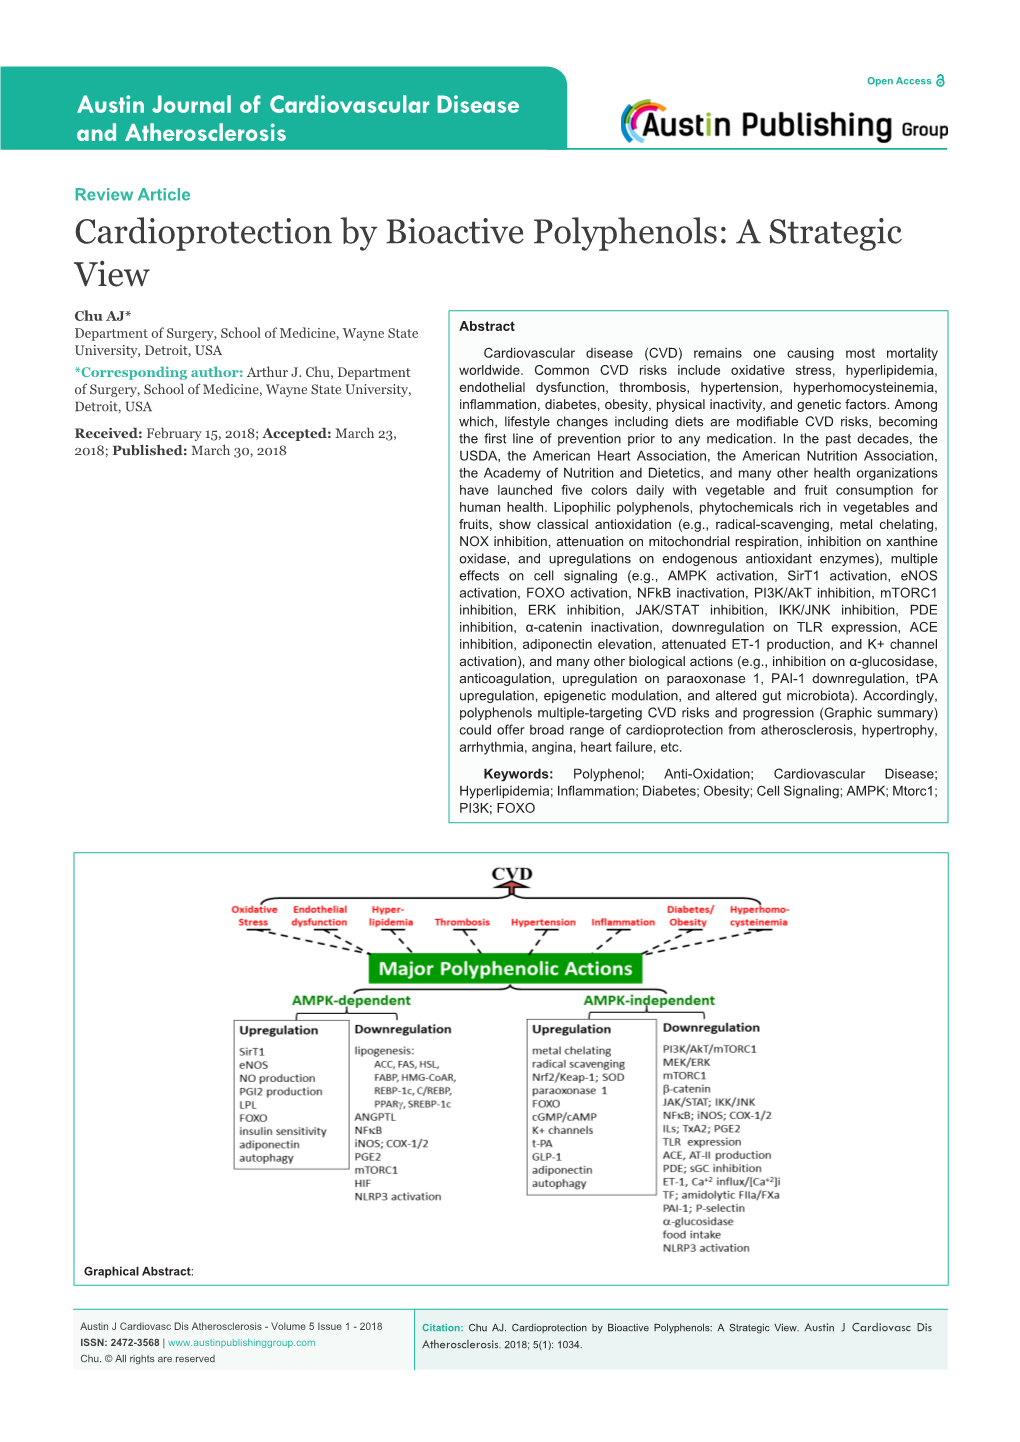 Cardioprotection by Bioactive Polyphenols: a Strategic View